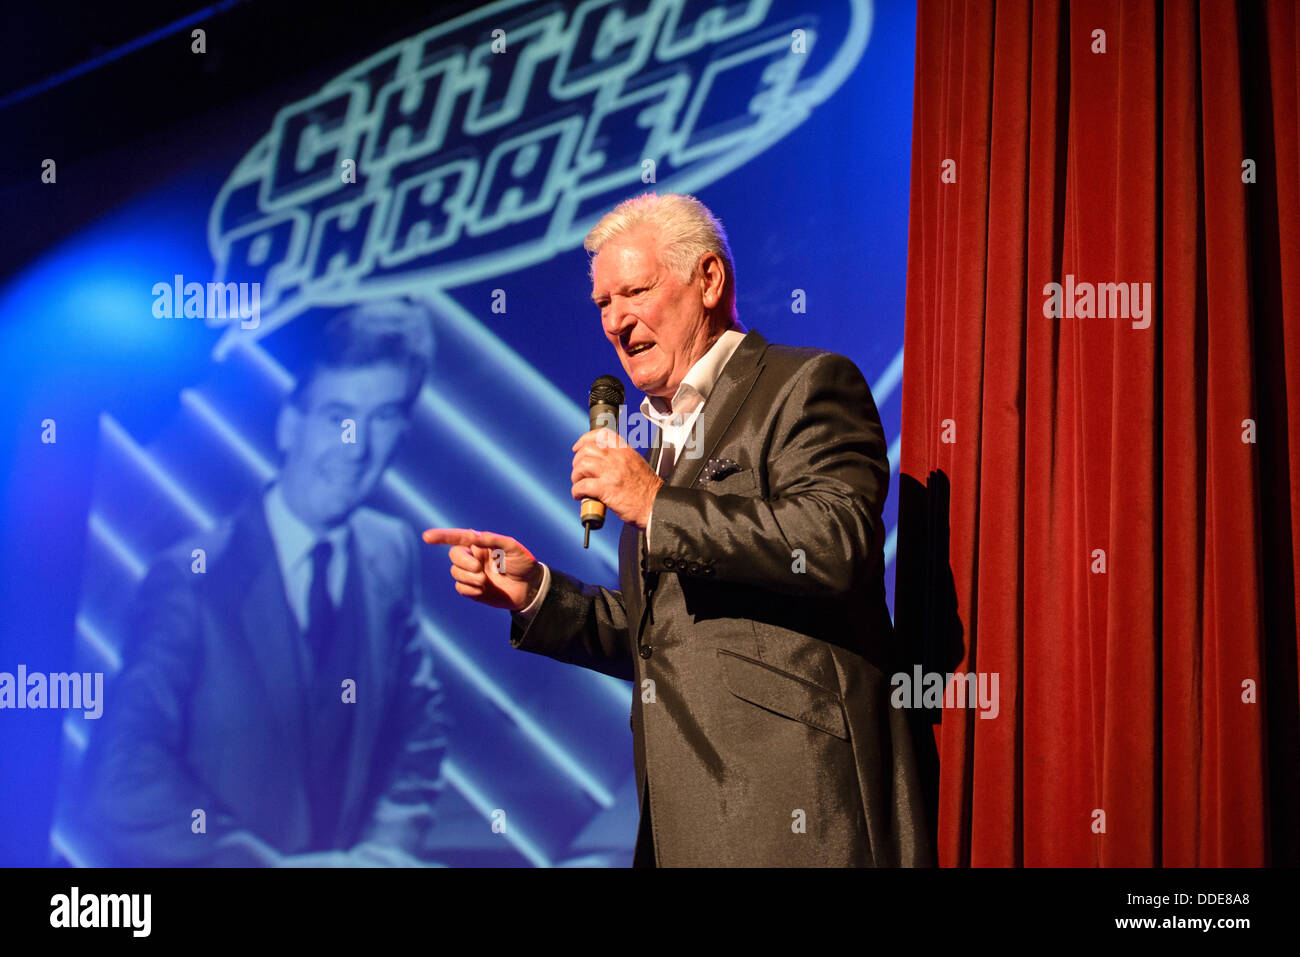 roy walker stand up comedian comedy act catch phrase Stock Photo